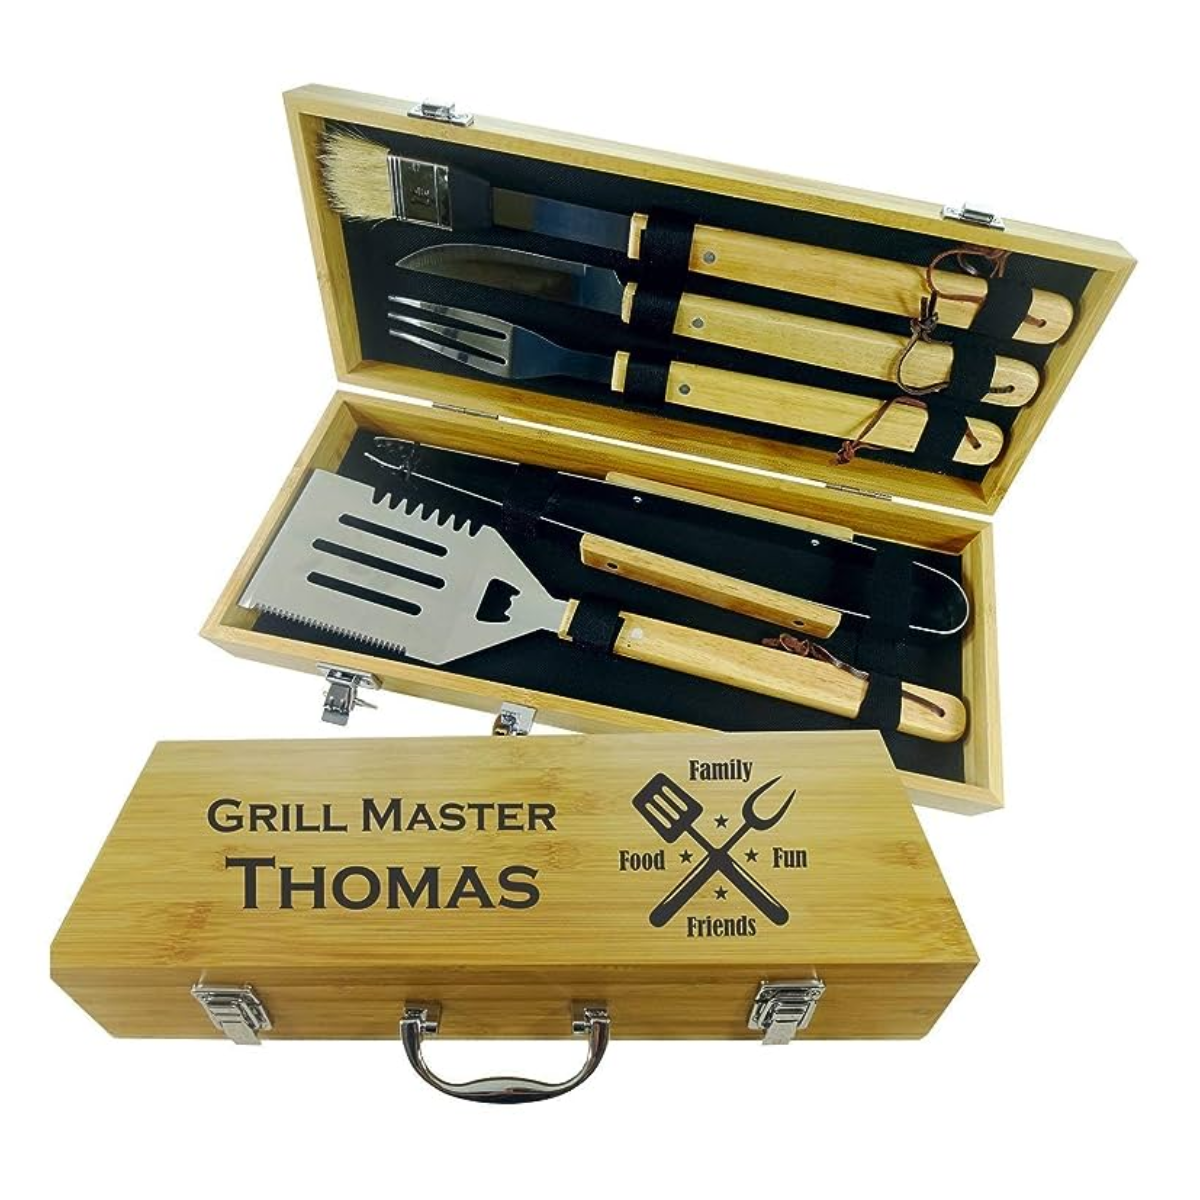 33. Customize His BBQ Game with a Personalized BBQ Set - A Unique Anniversary Gift Idea!